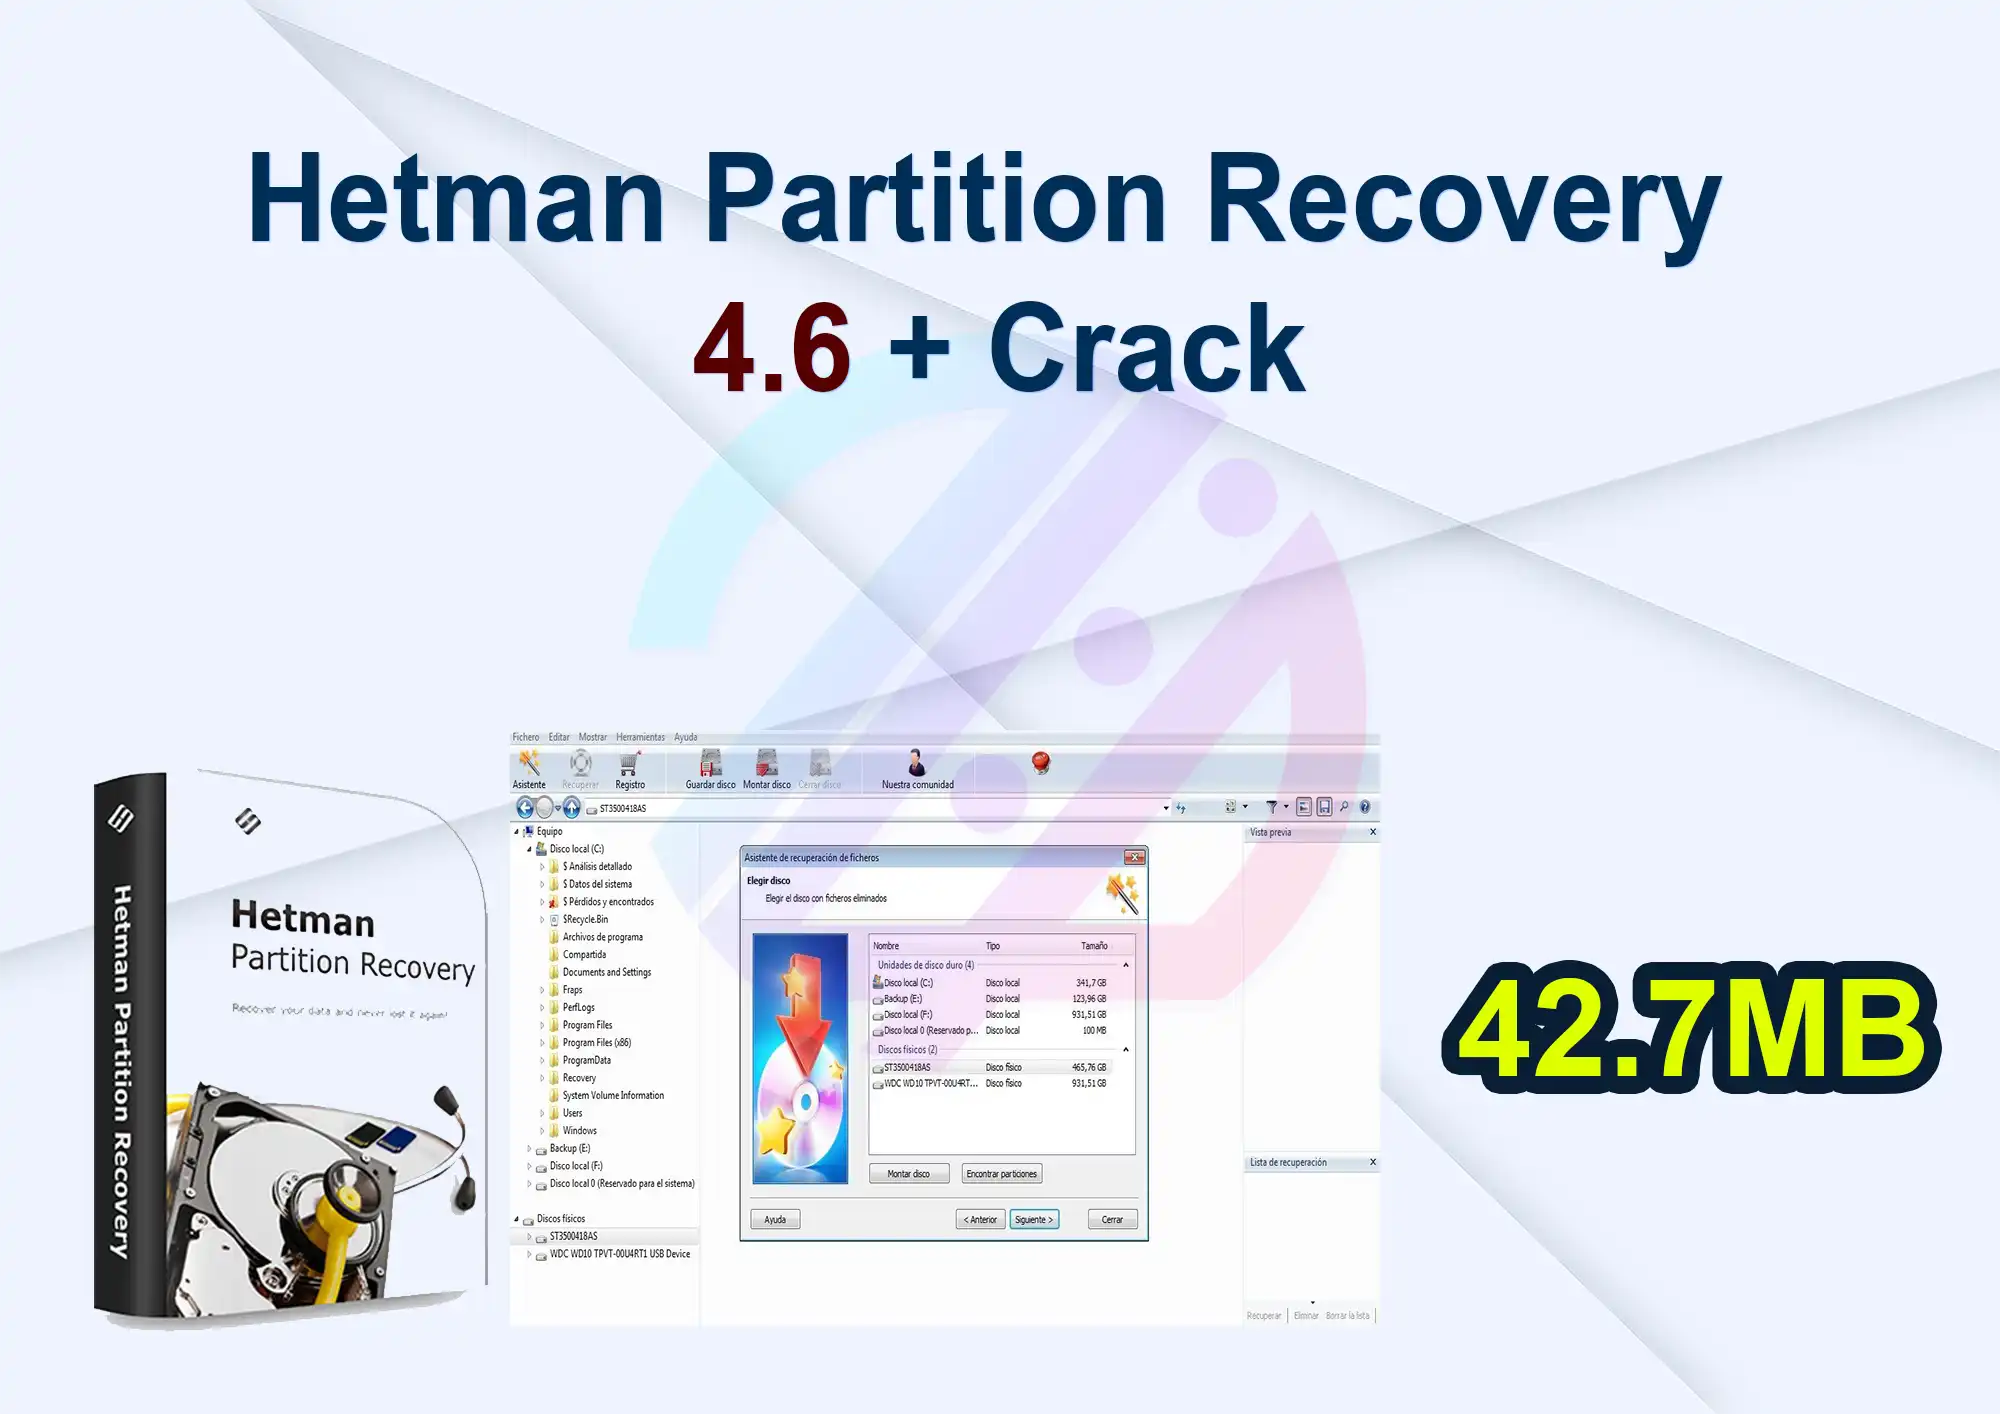 Hetman Partition Recovery 4.6 + Crack